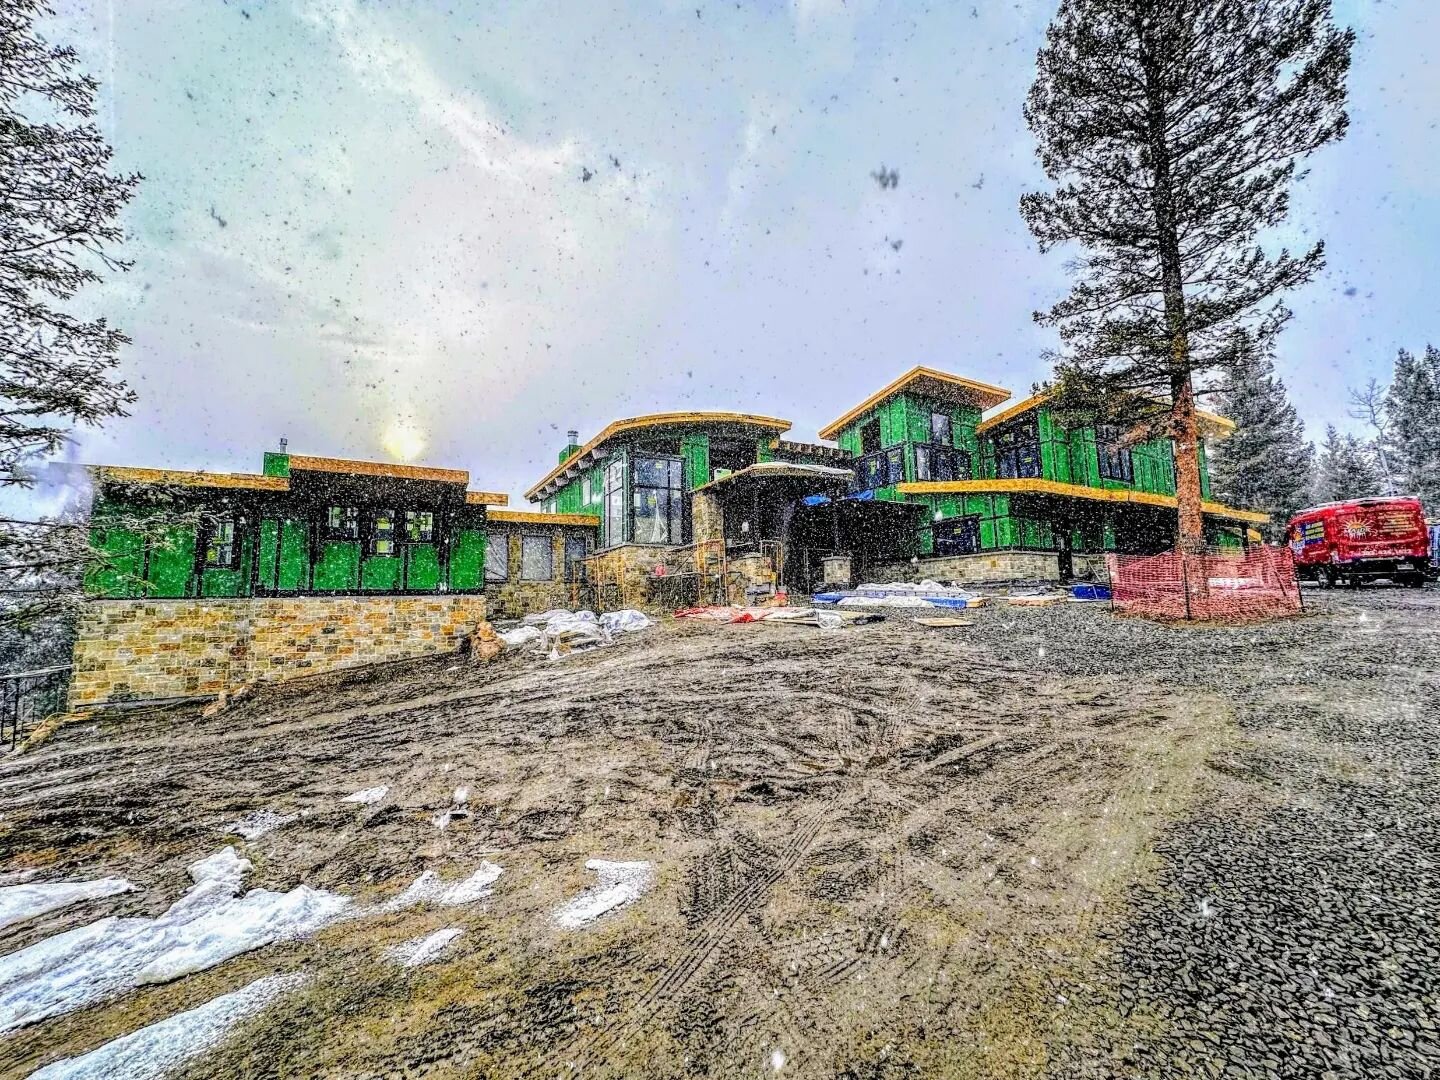 A little snow action at Aspen Springs! ❄️ Happy Rocky Mountain spring! 🌷

#generalcontractor #exteriordesign #buildinginallweather #buildingdreamhomes #constructionpartners #fromthegroundup #builders #buildersofig #BESTBUILT #bestcustomhomes